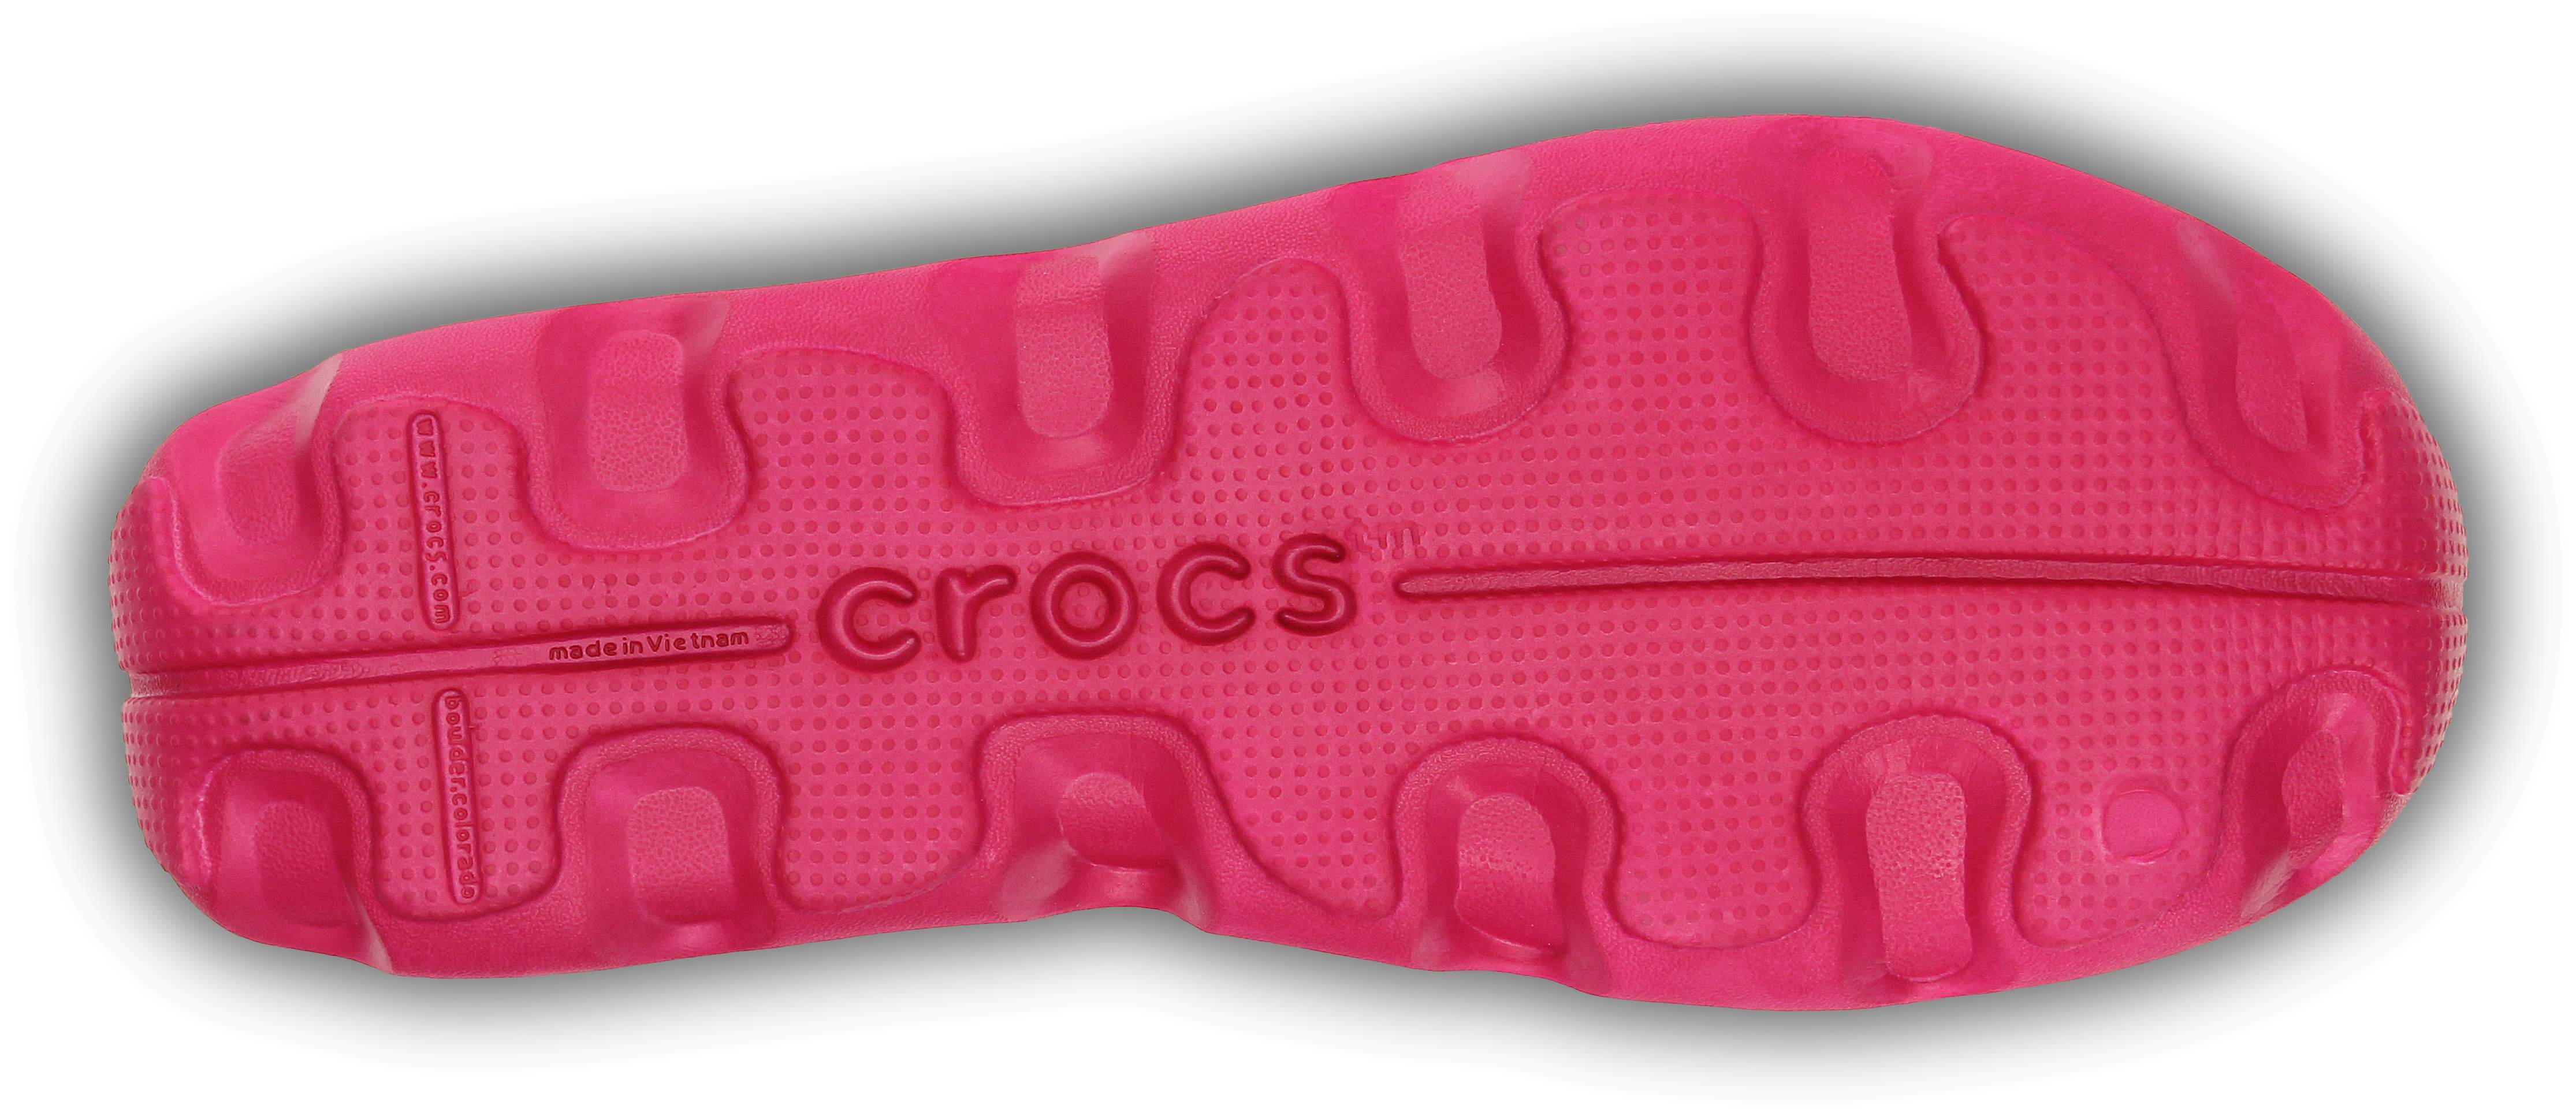 Crocs Duet Busy Day Mary Jane Girls Juniors Shoes | eBay